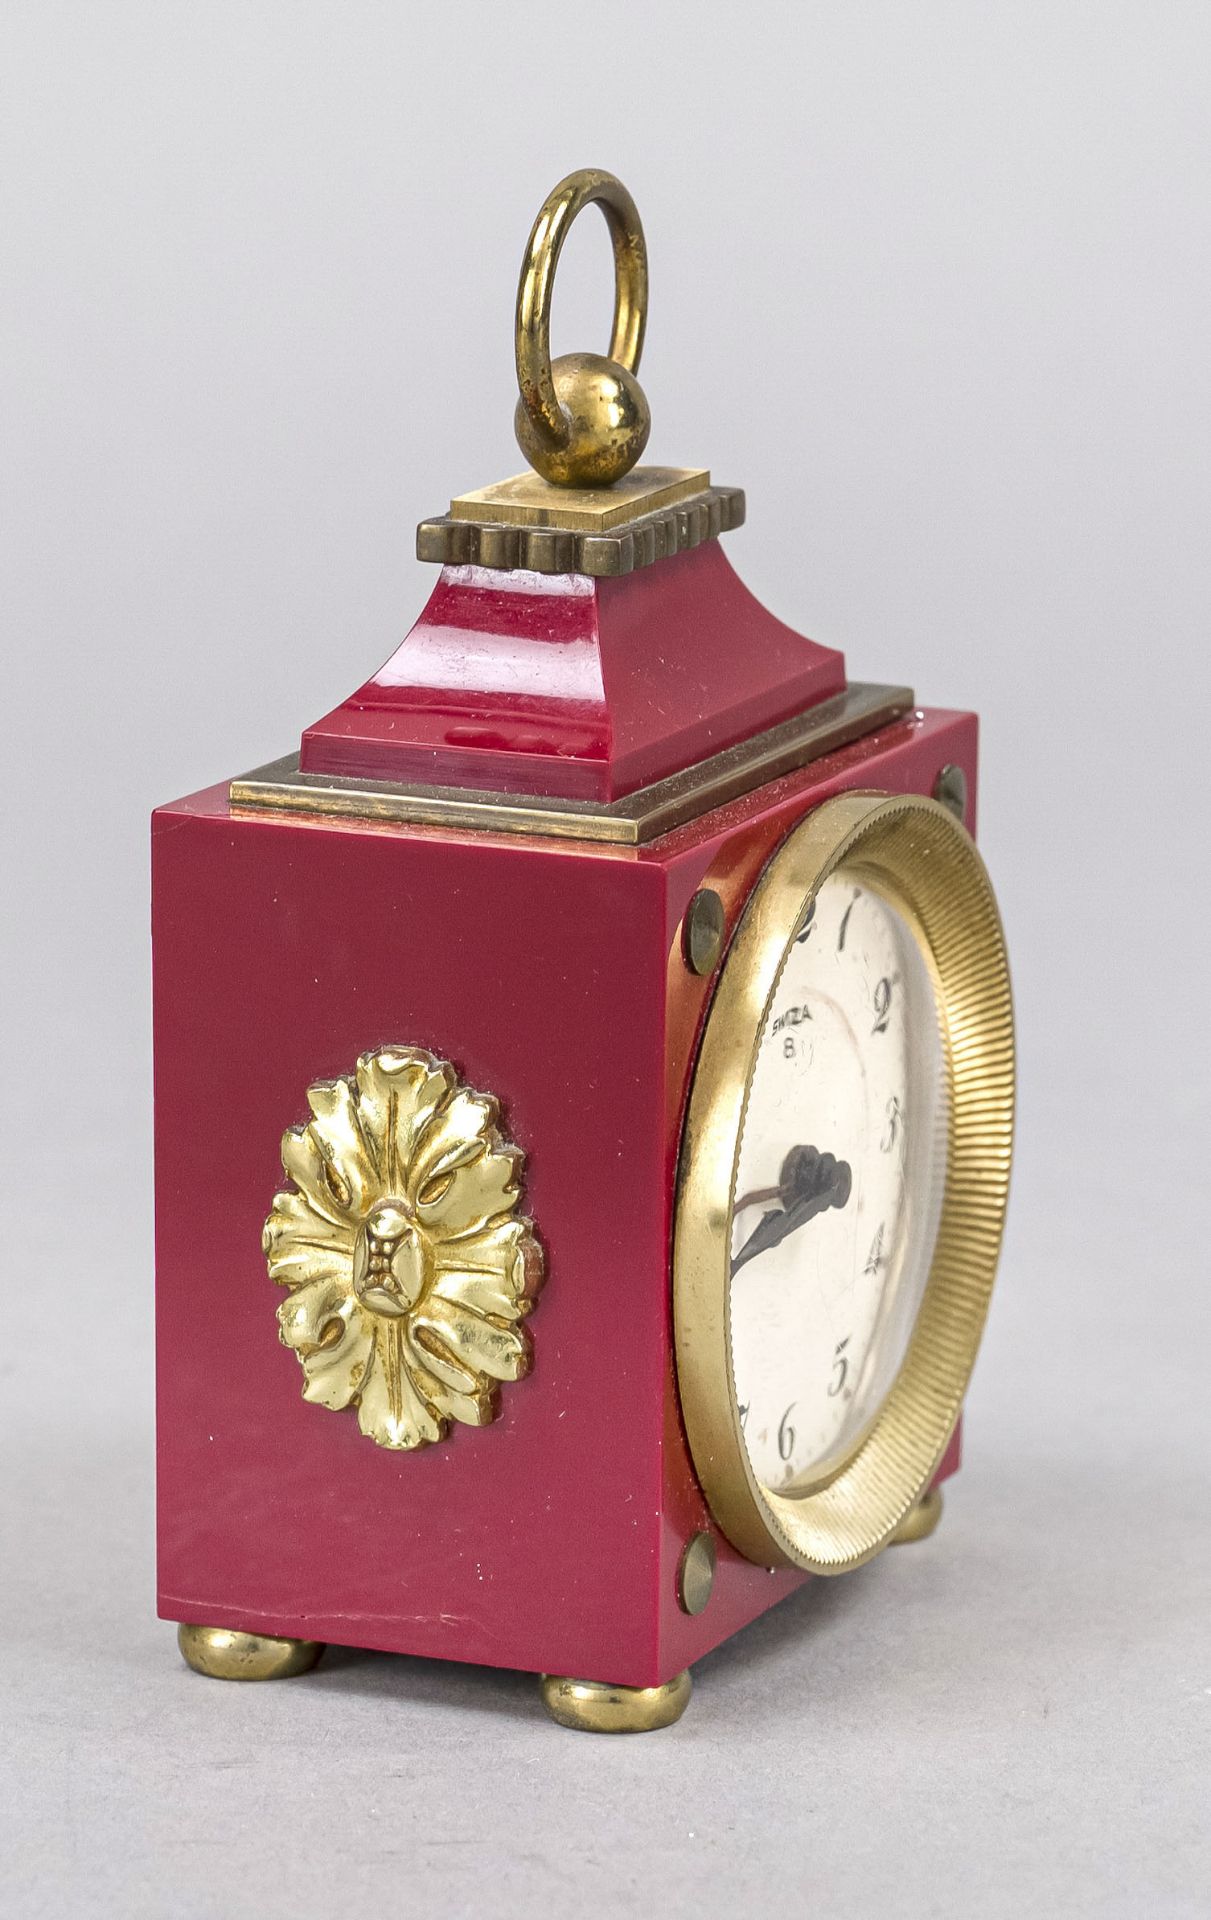 Swiza travel alarm clock, circa 1985, red plastic with gilded decorative elements, top handle, - Image 2 of 2